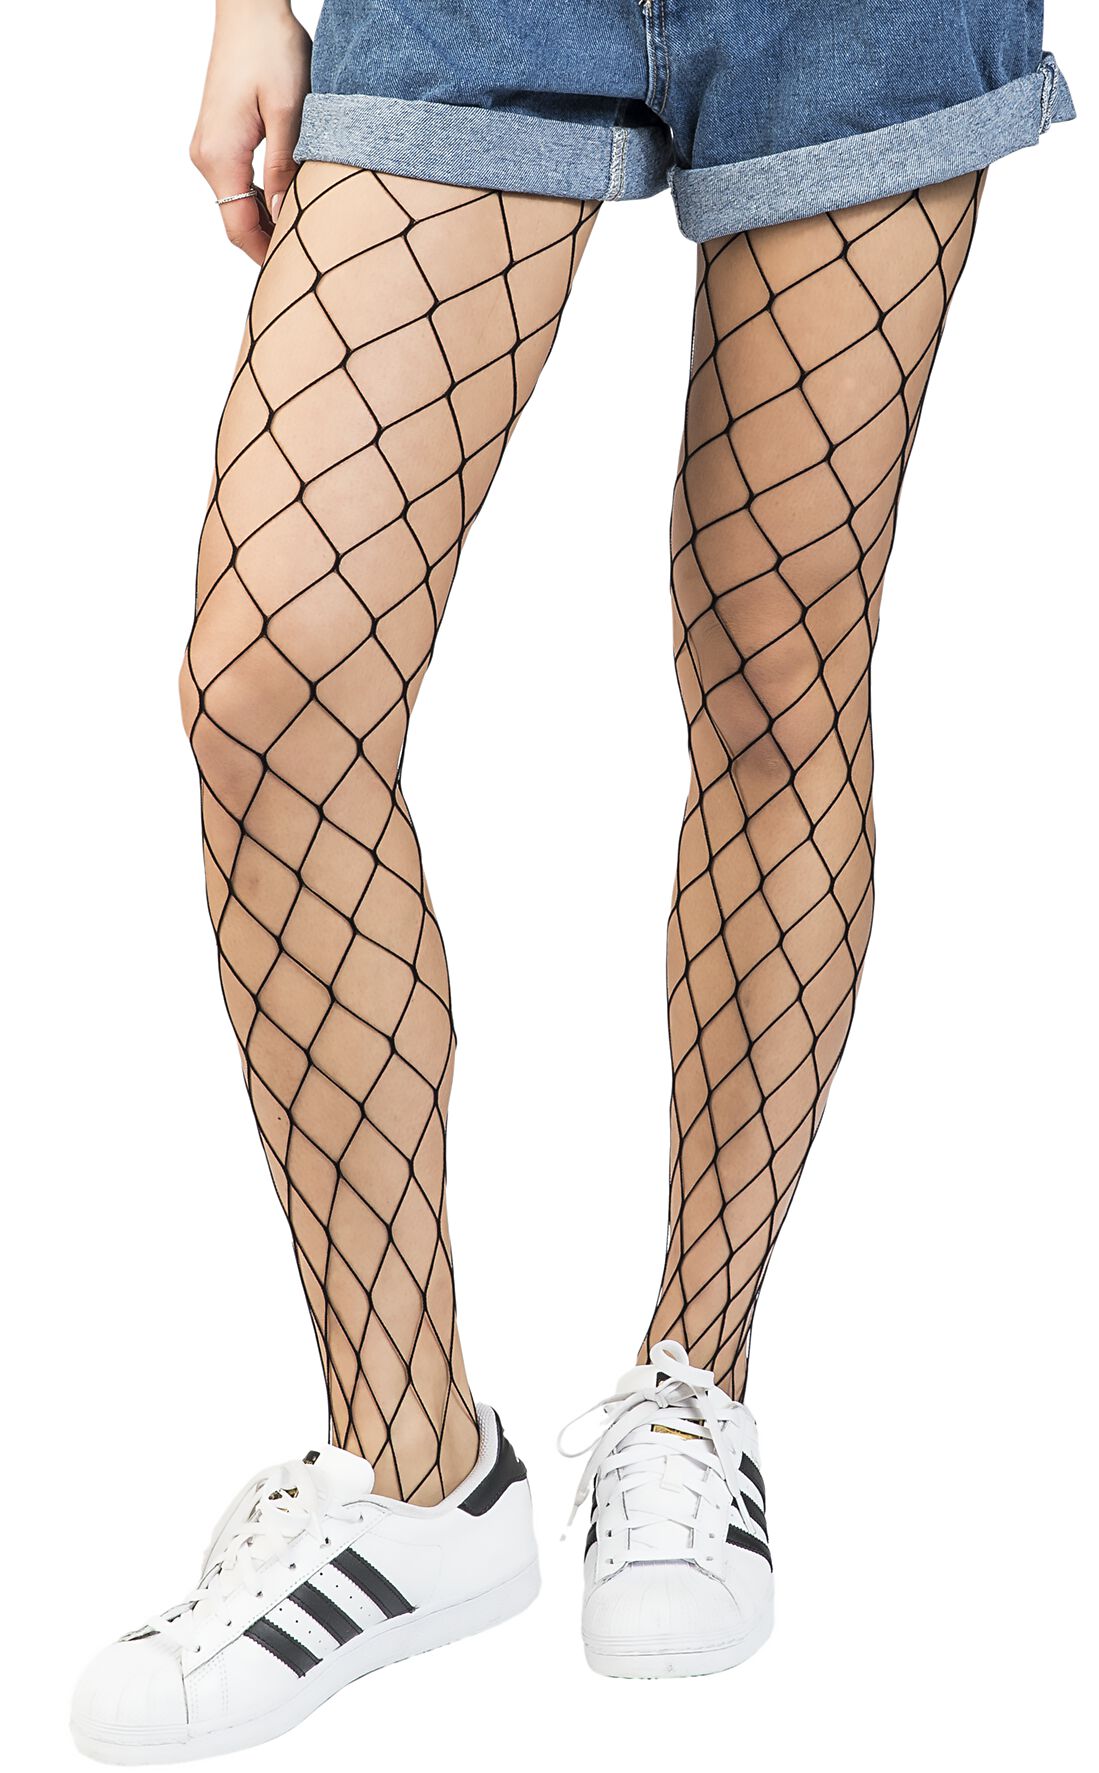 Pamela Mann Extra Large Net Tigths with waistband Tights black